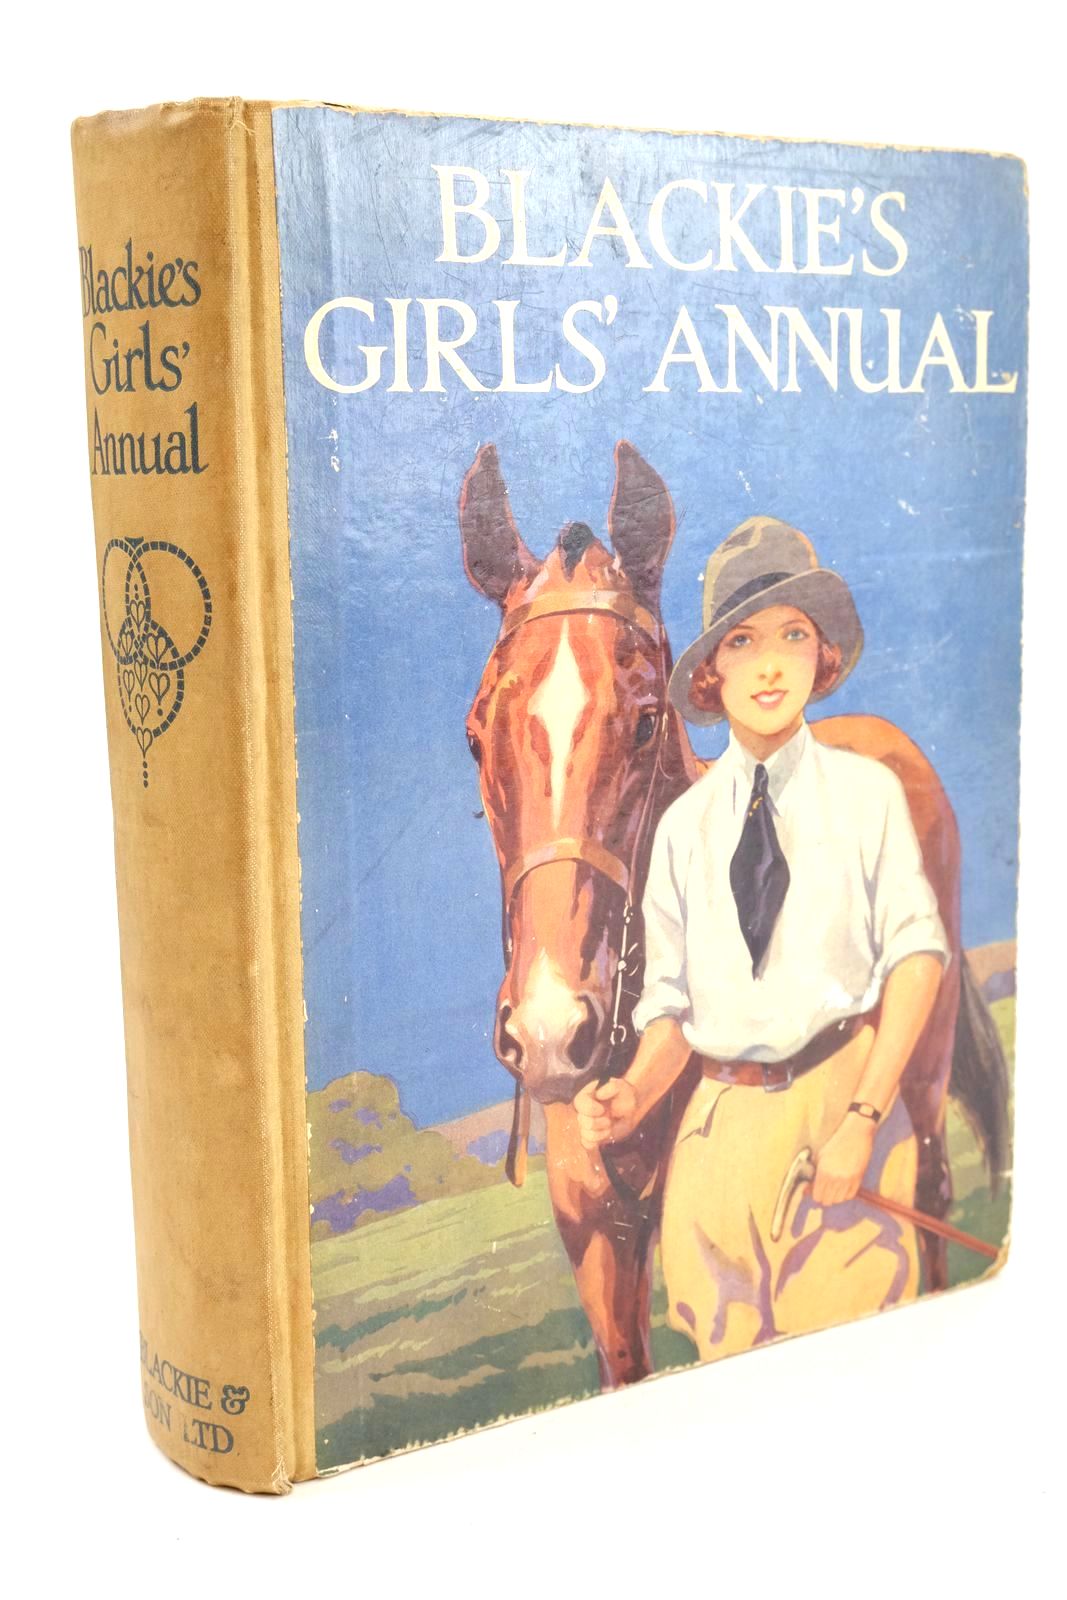 Photo of BLACKIE'S GIRLS' ANNUAL written by Buckingham, M.E. Cobb, Ruth Joan, Natalie Methley, Violet M. et al, illustrated by Bestall, Alfred Brock, C.E. et al., published by Blackie &amp; Son Ltd. (STOCK CODE: 1324768)  for sale by Stella & Rose's Books